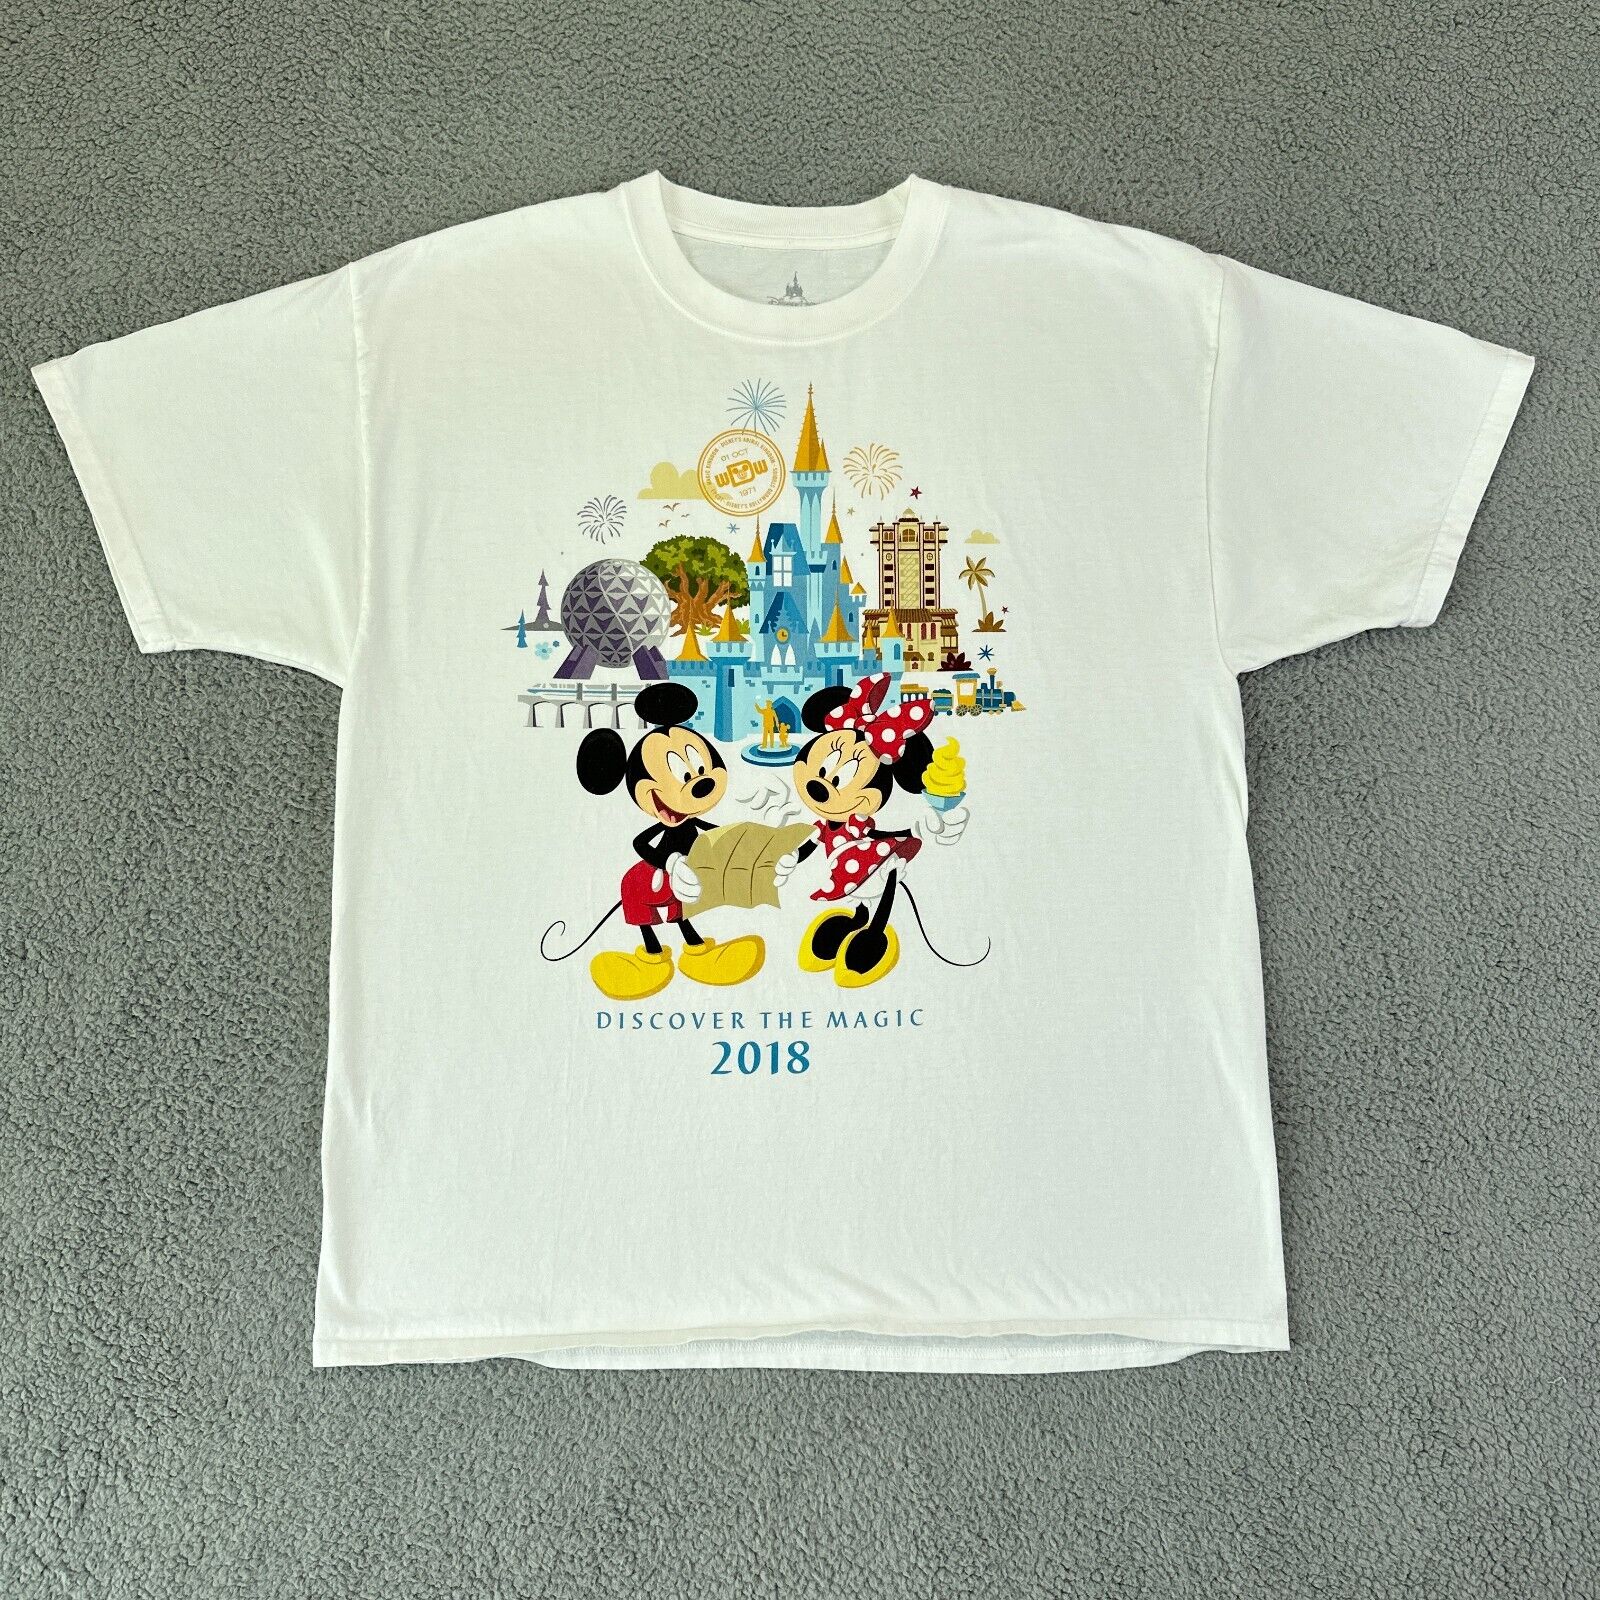 Disney World Shirt Mens Extra Large White Mickey Minnie 2018 Discover the Magic